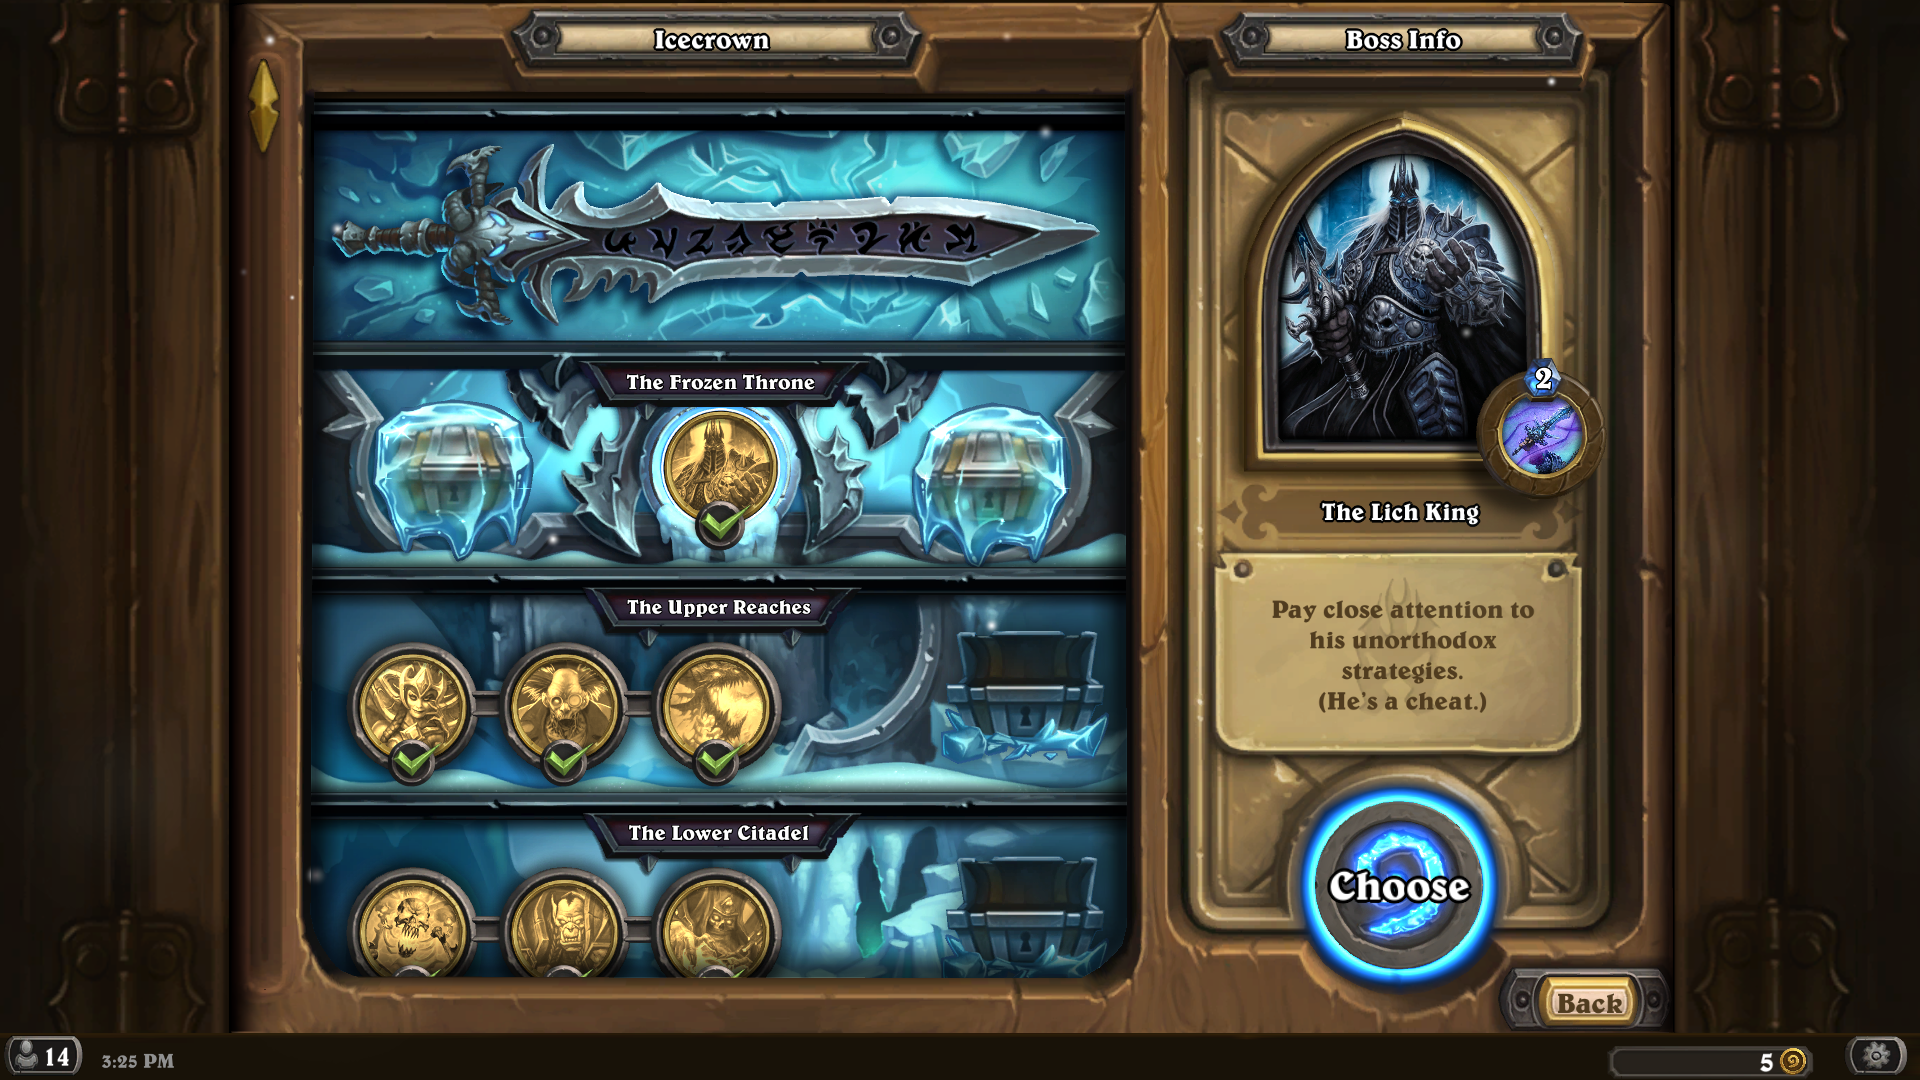 knights of the frozen throne solo adventure